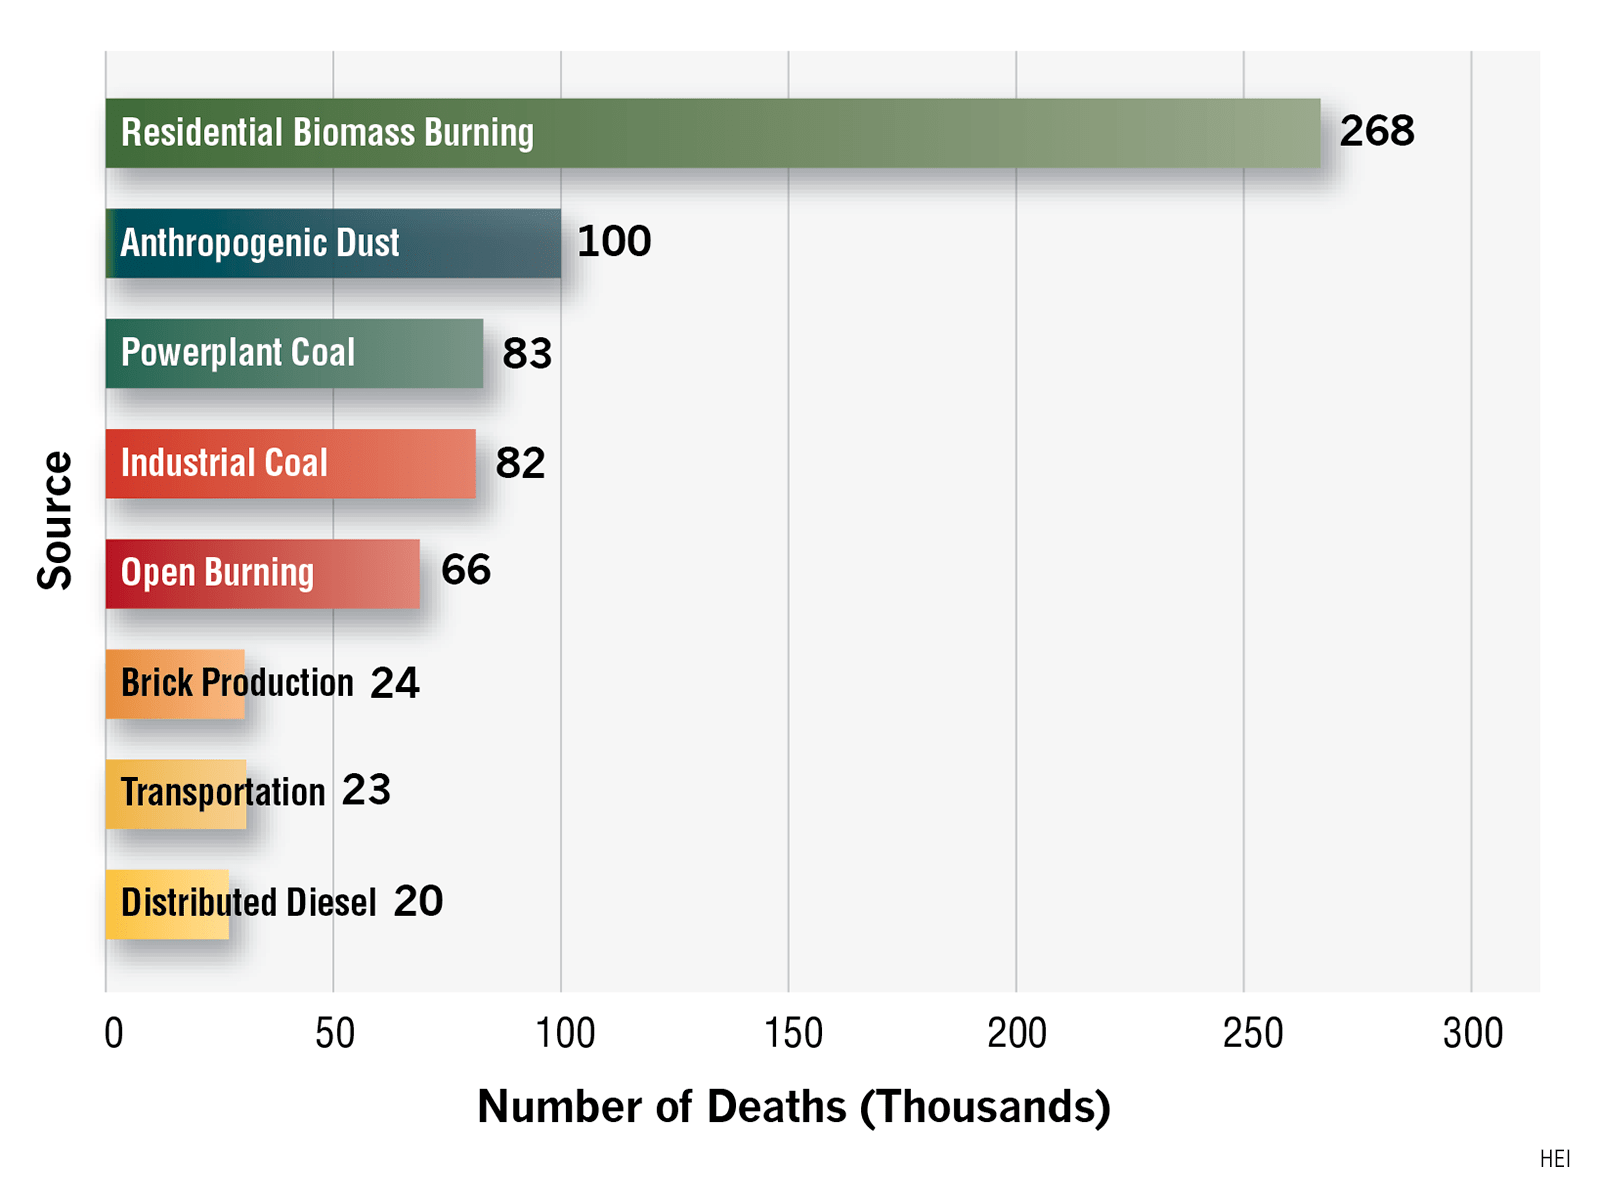 Number of deaths by air pollution source